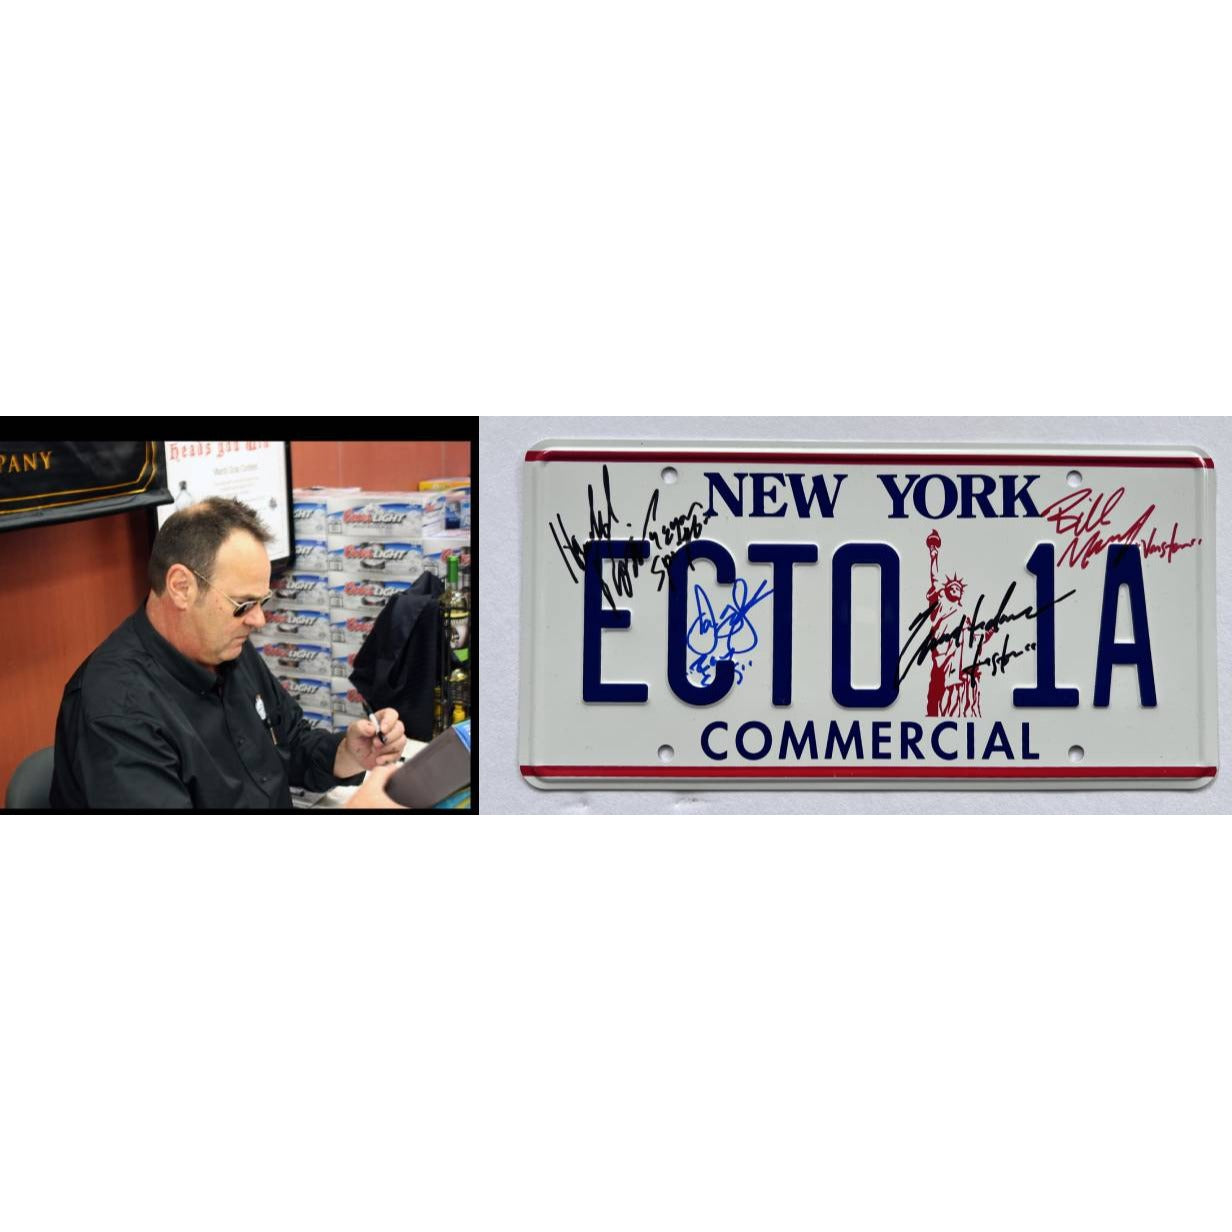 Ghostbusters Bill Murray Dan Aykroyd Sigourney Weaver Harold Ramis Ernie Hudson authentic license plate signed with proof